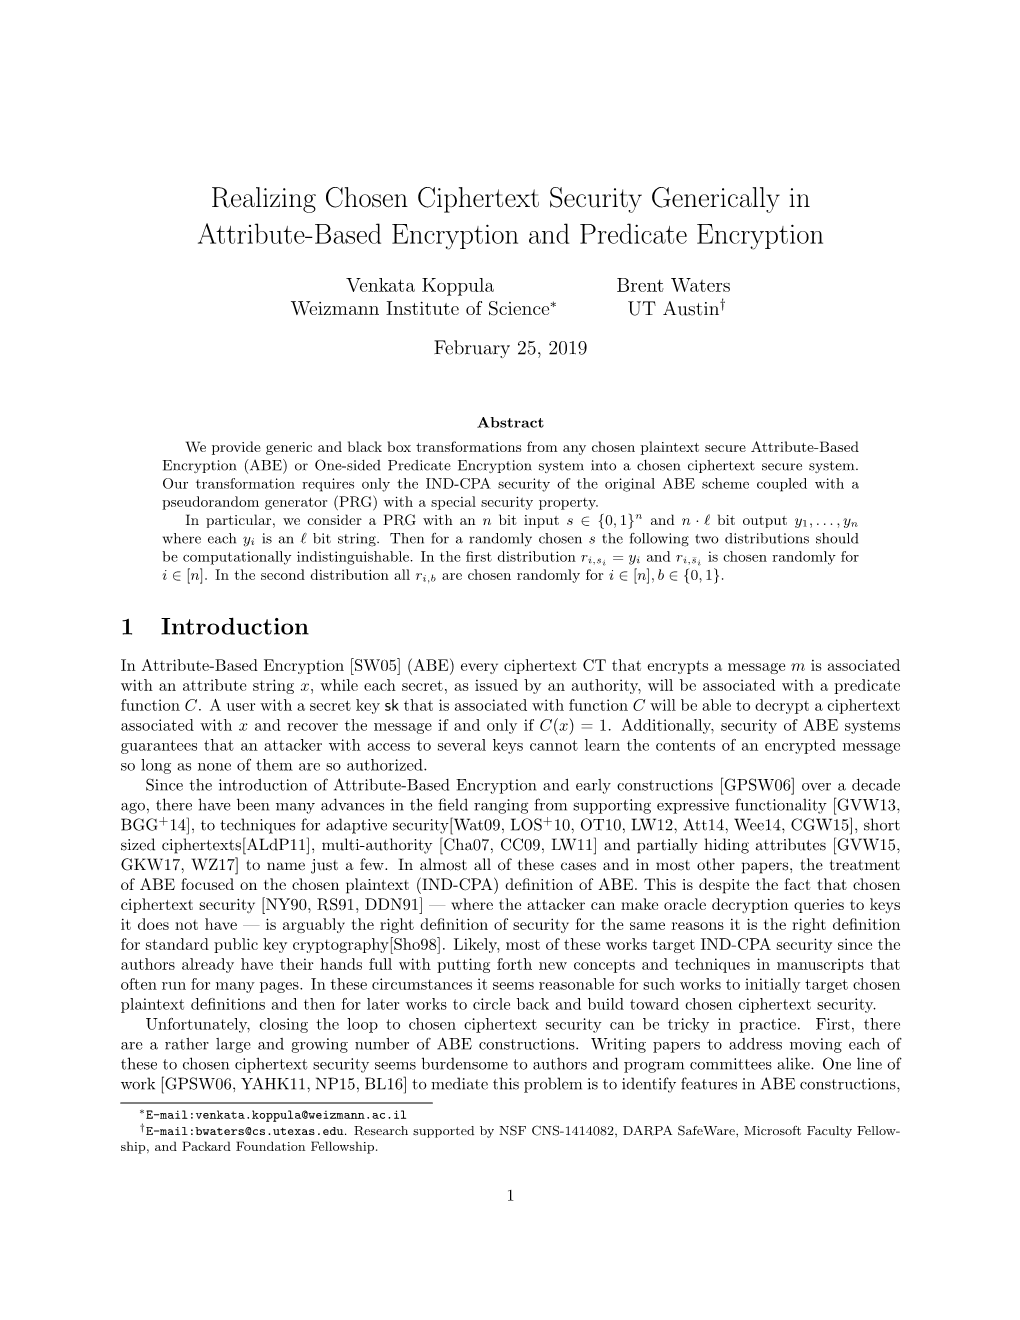 Realizing Chosen Ciphertext Security Generically in Attribute-Based Encryption and Predicate Encryption